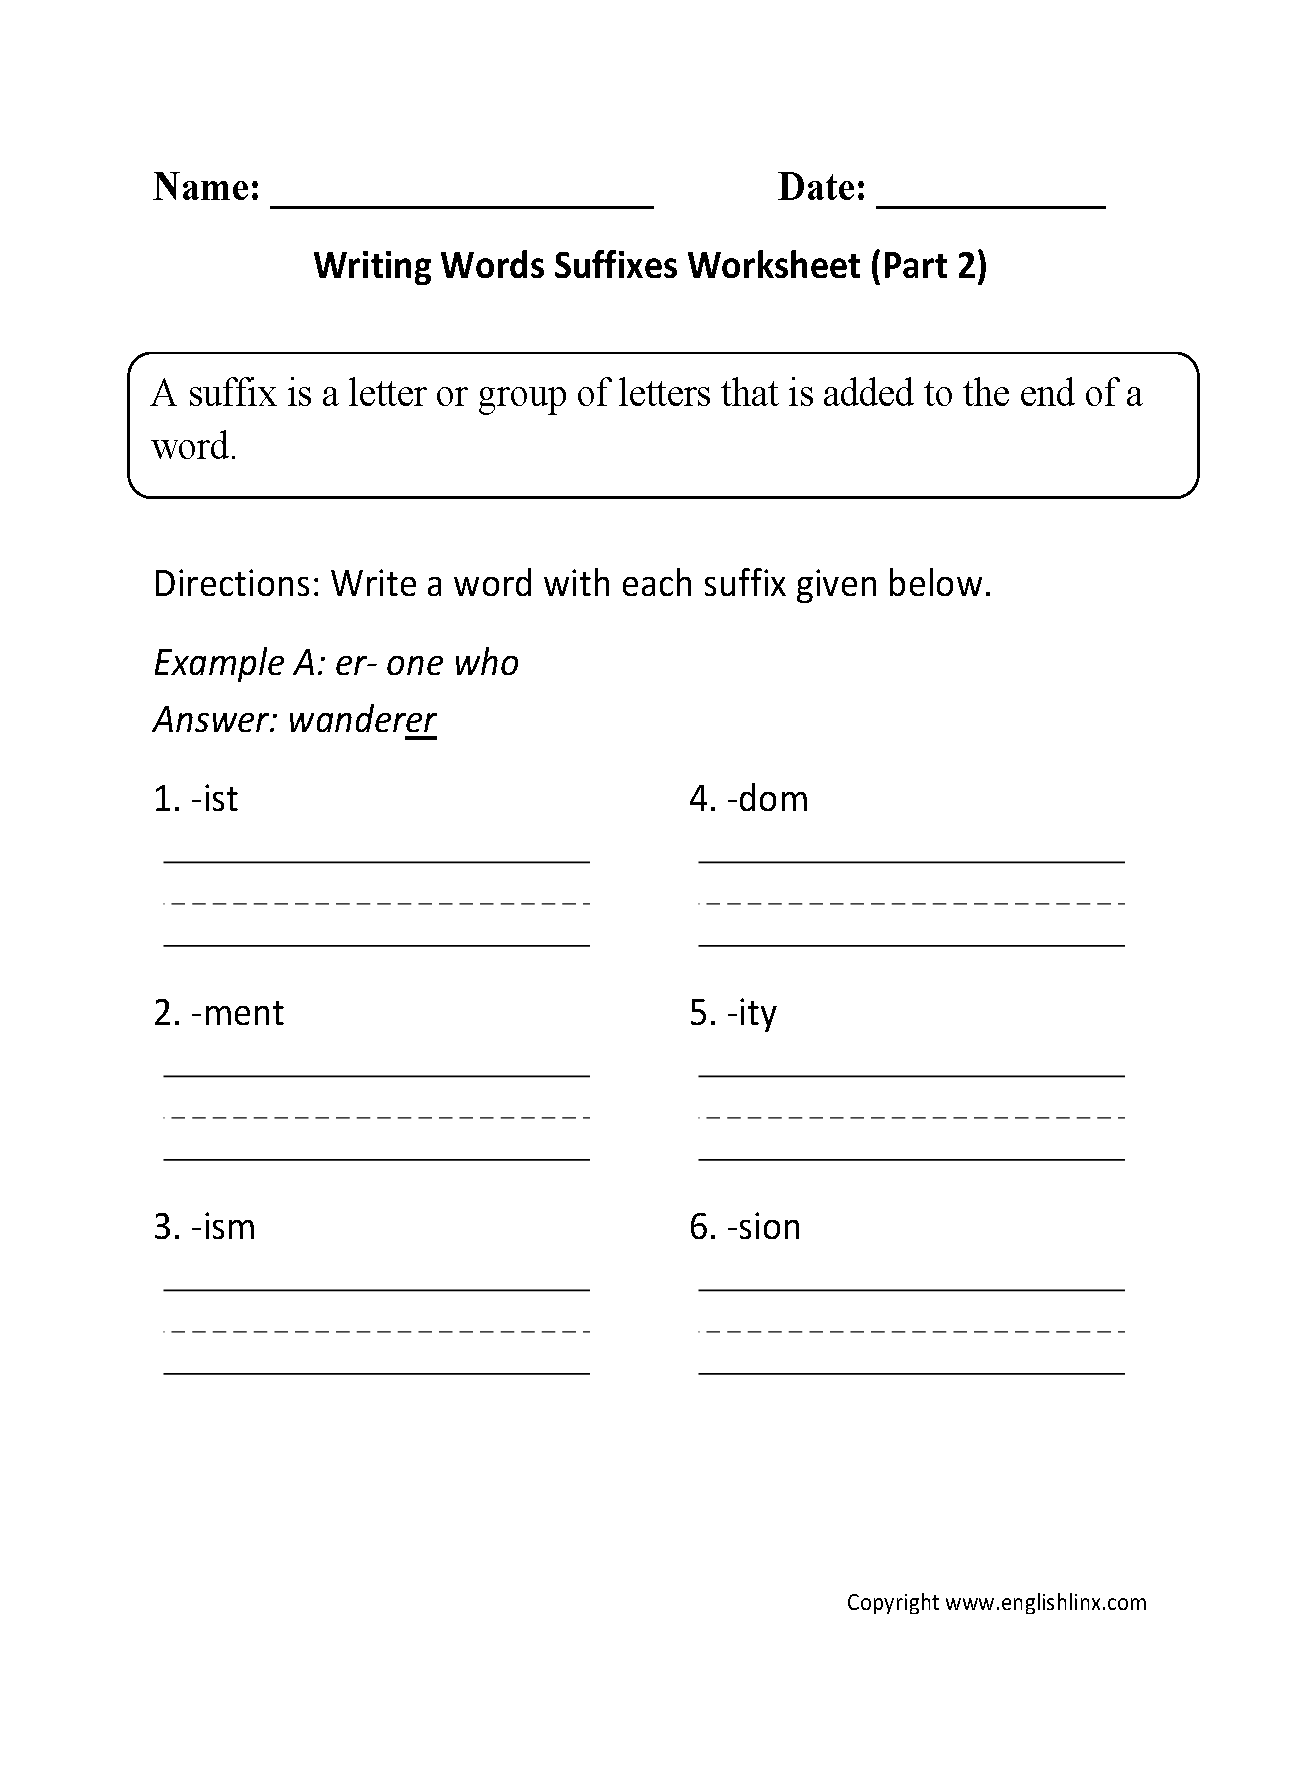 Writing Words Suffixes Worksheet Part 2